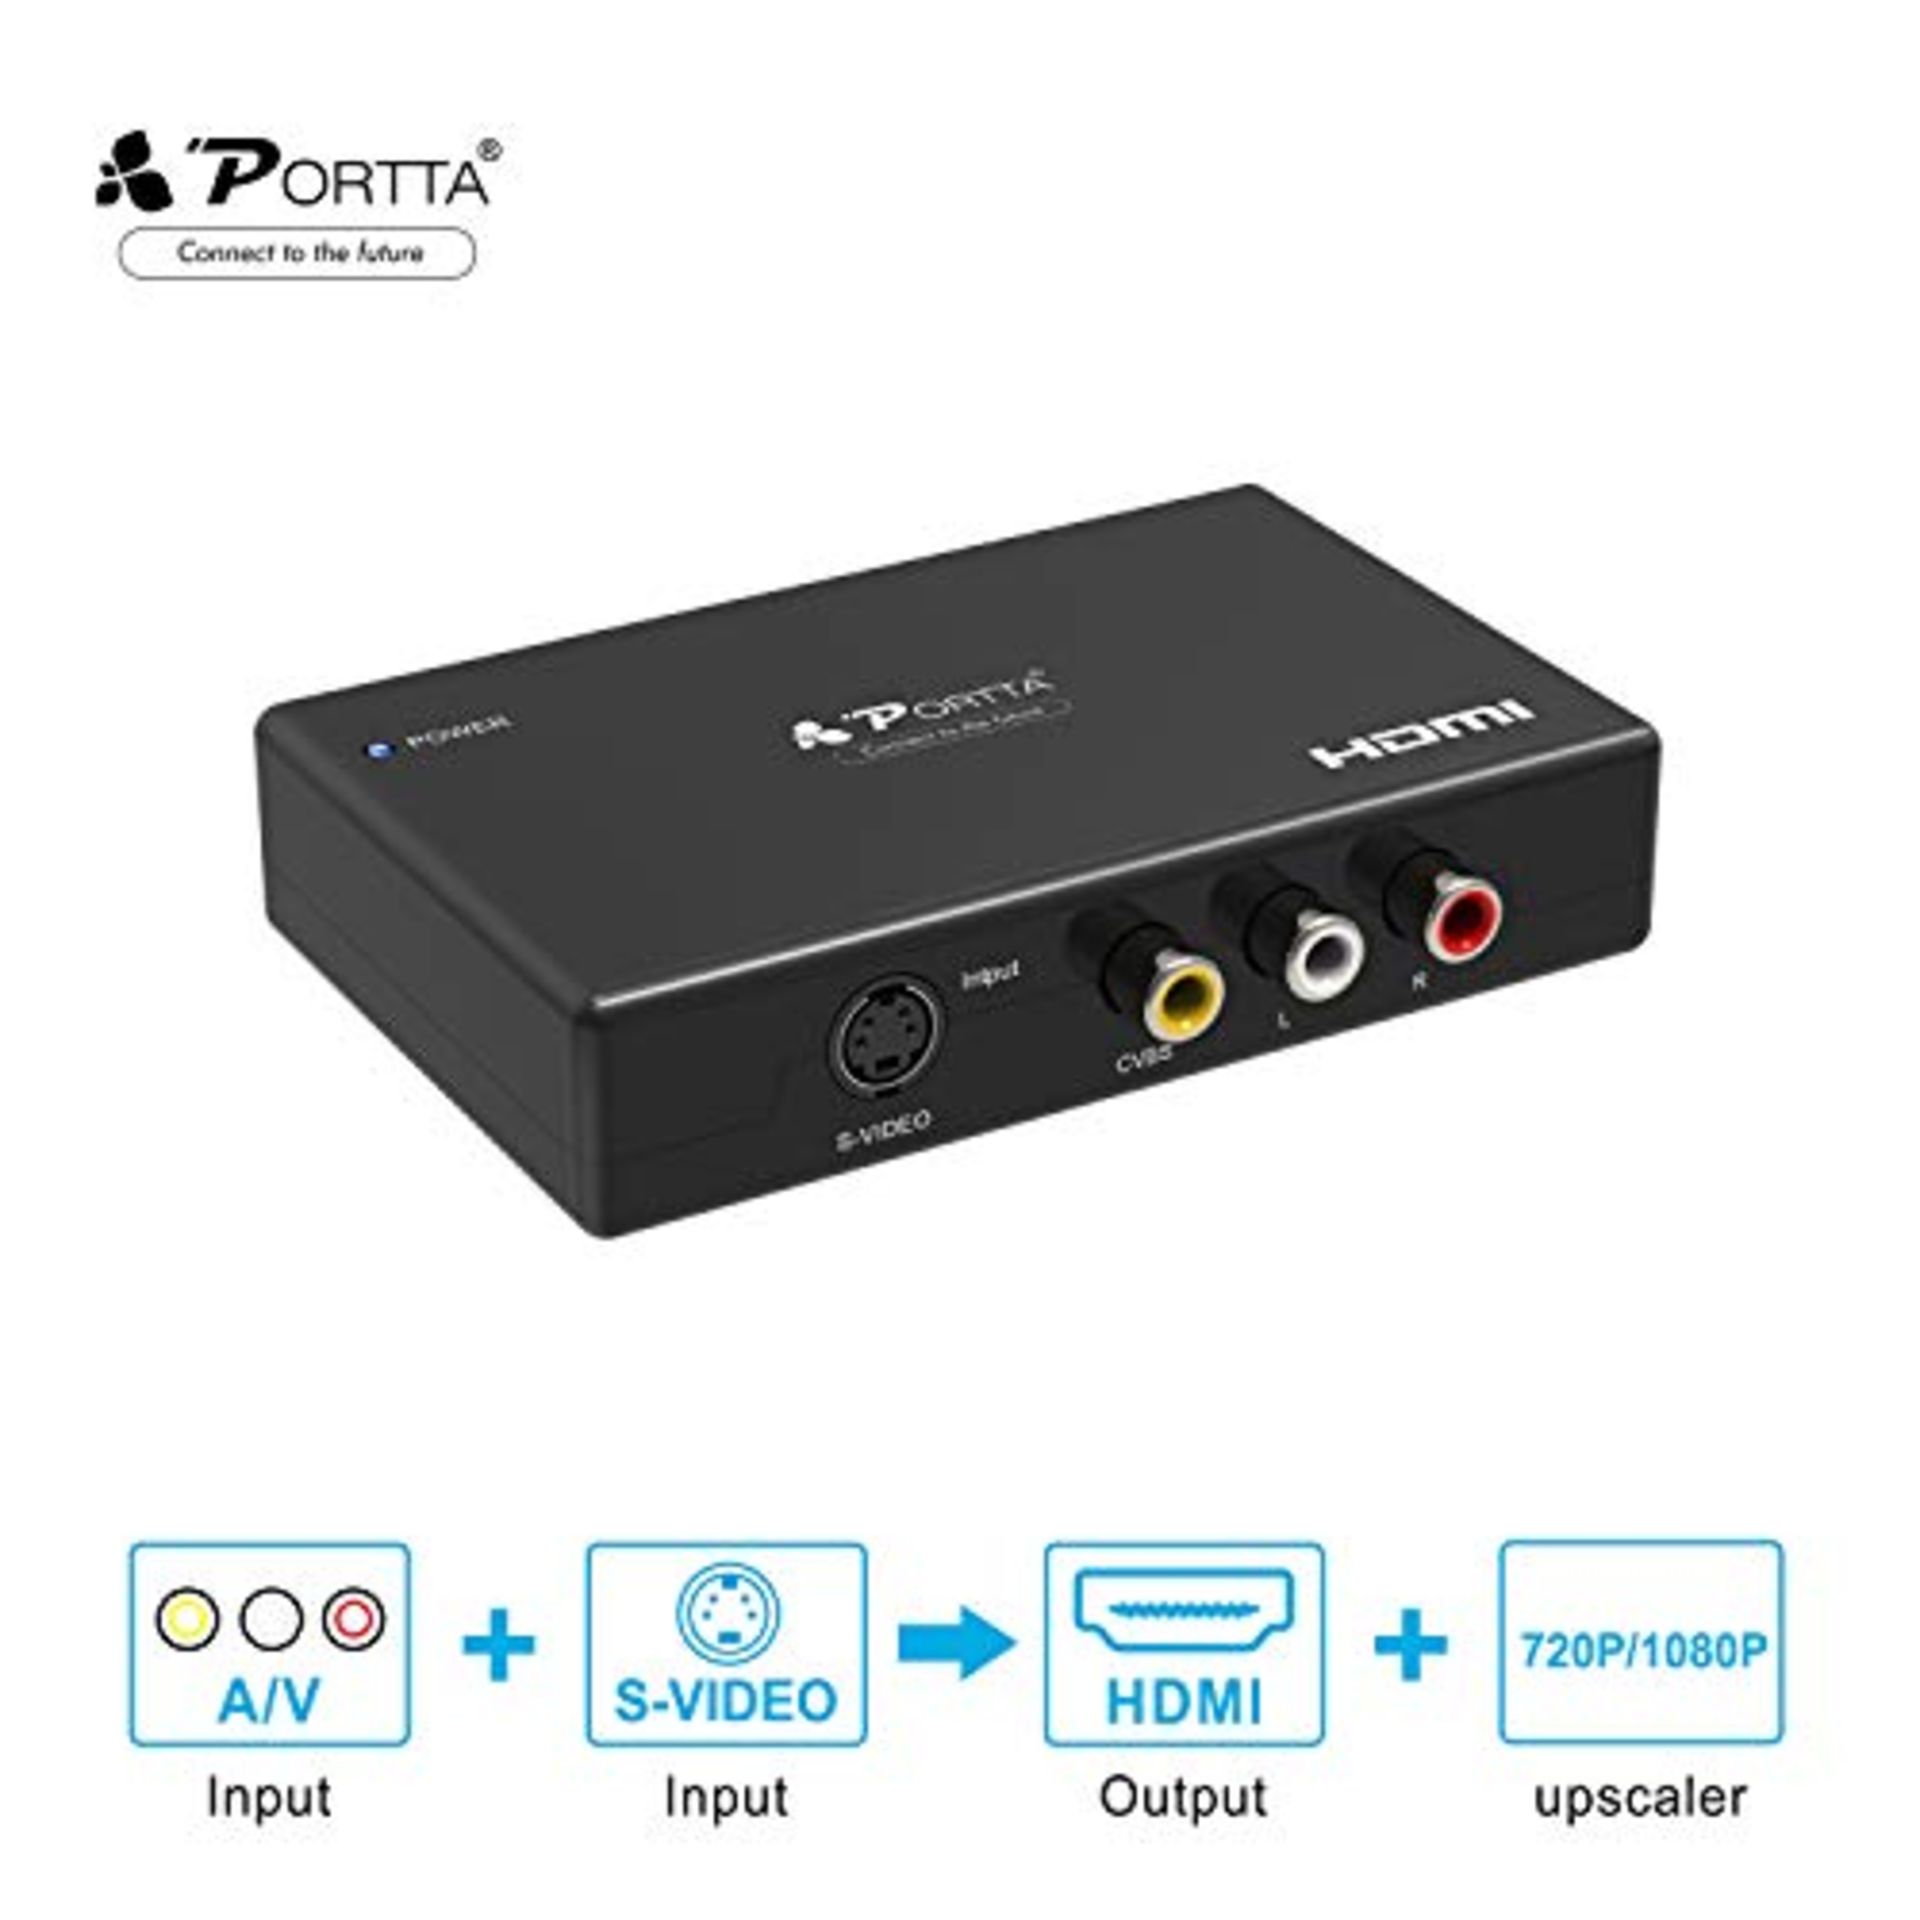 Portta HDMI Converter Up-scaler AV or CVBS and S-Video and R/L Audio to HDMI Converter